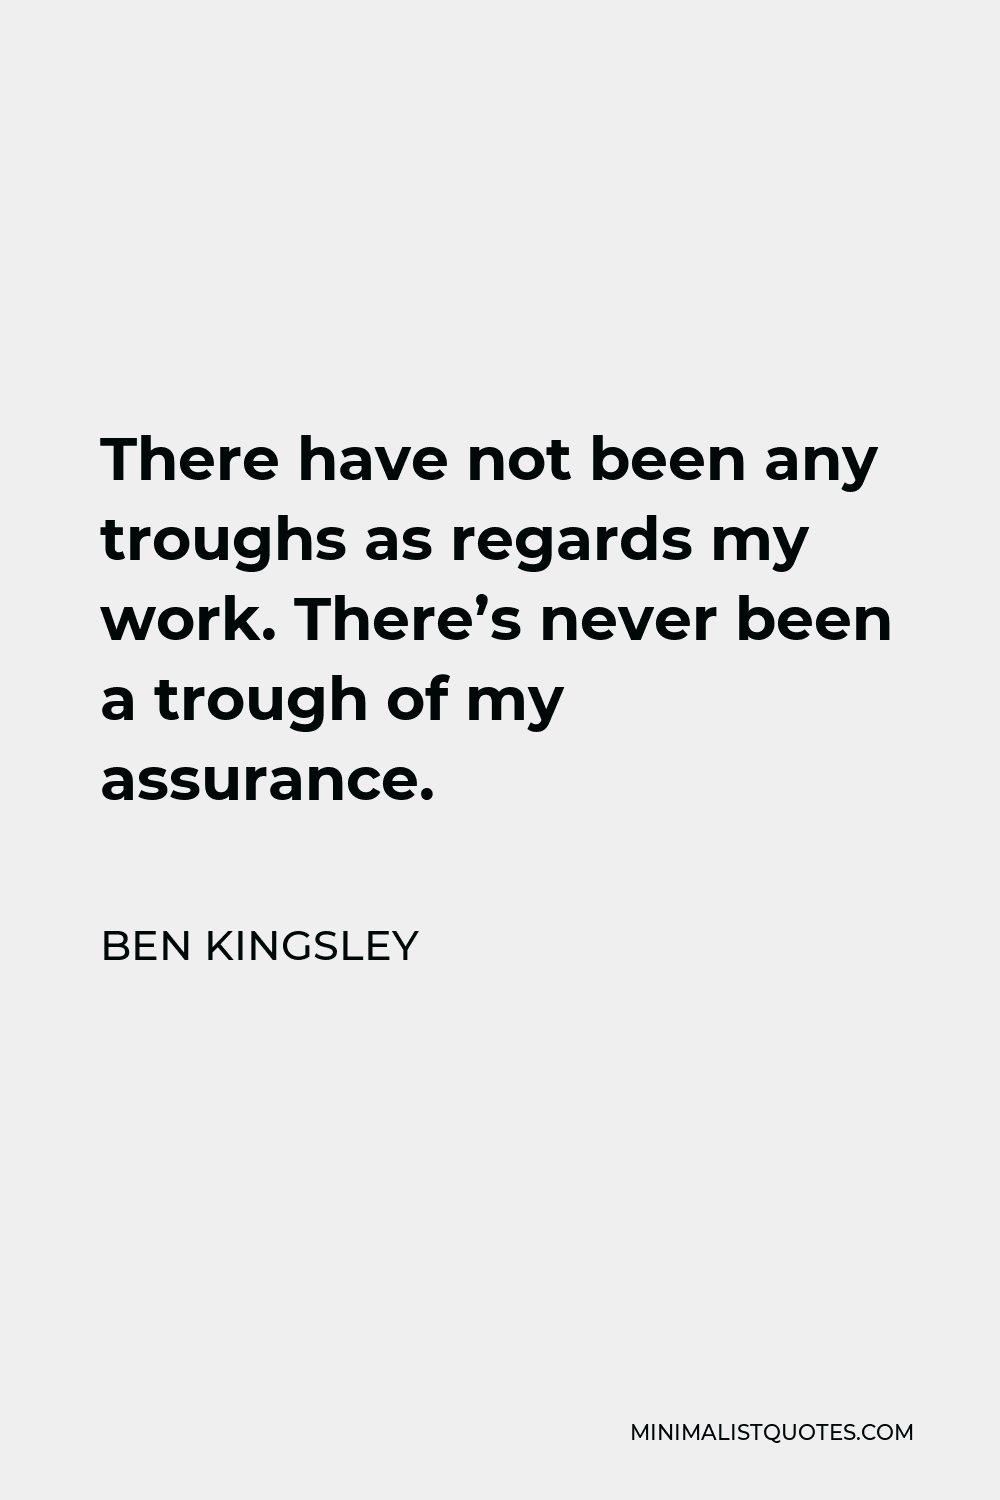 Ben Kingsley Quote - There have not been any troughs as regards my work. There’s never been a trough of my assurance.